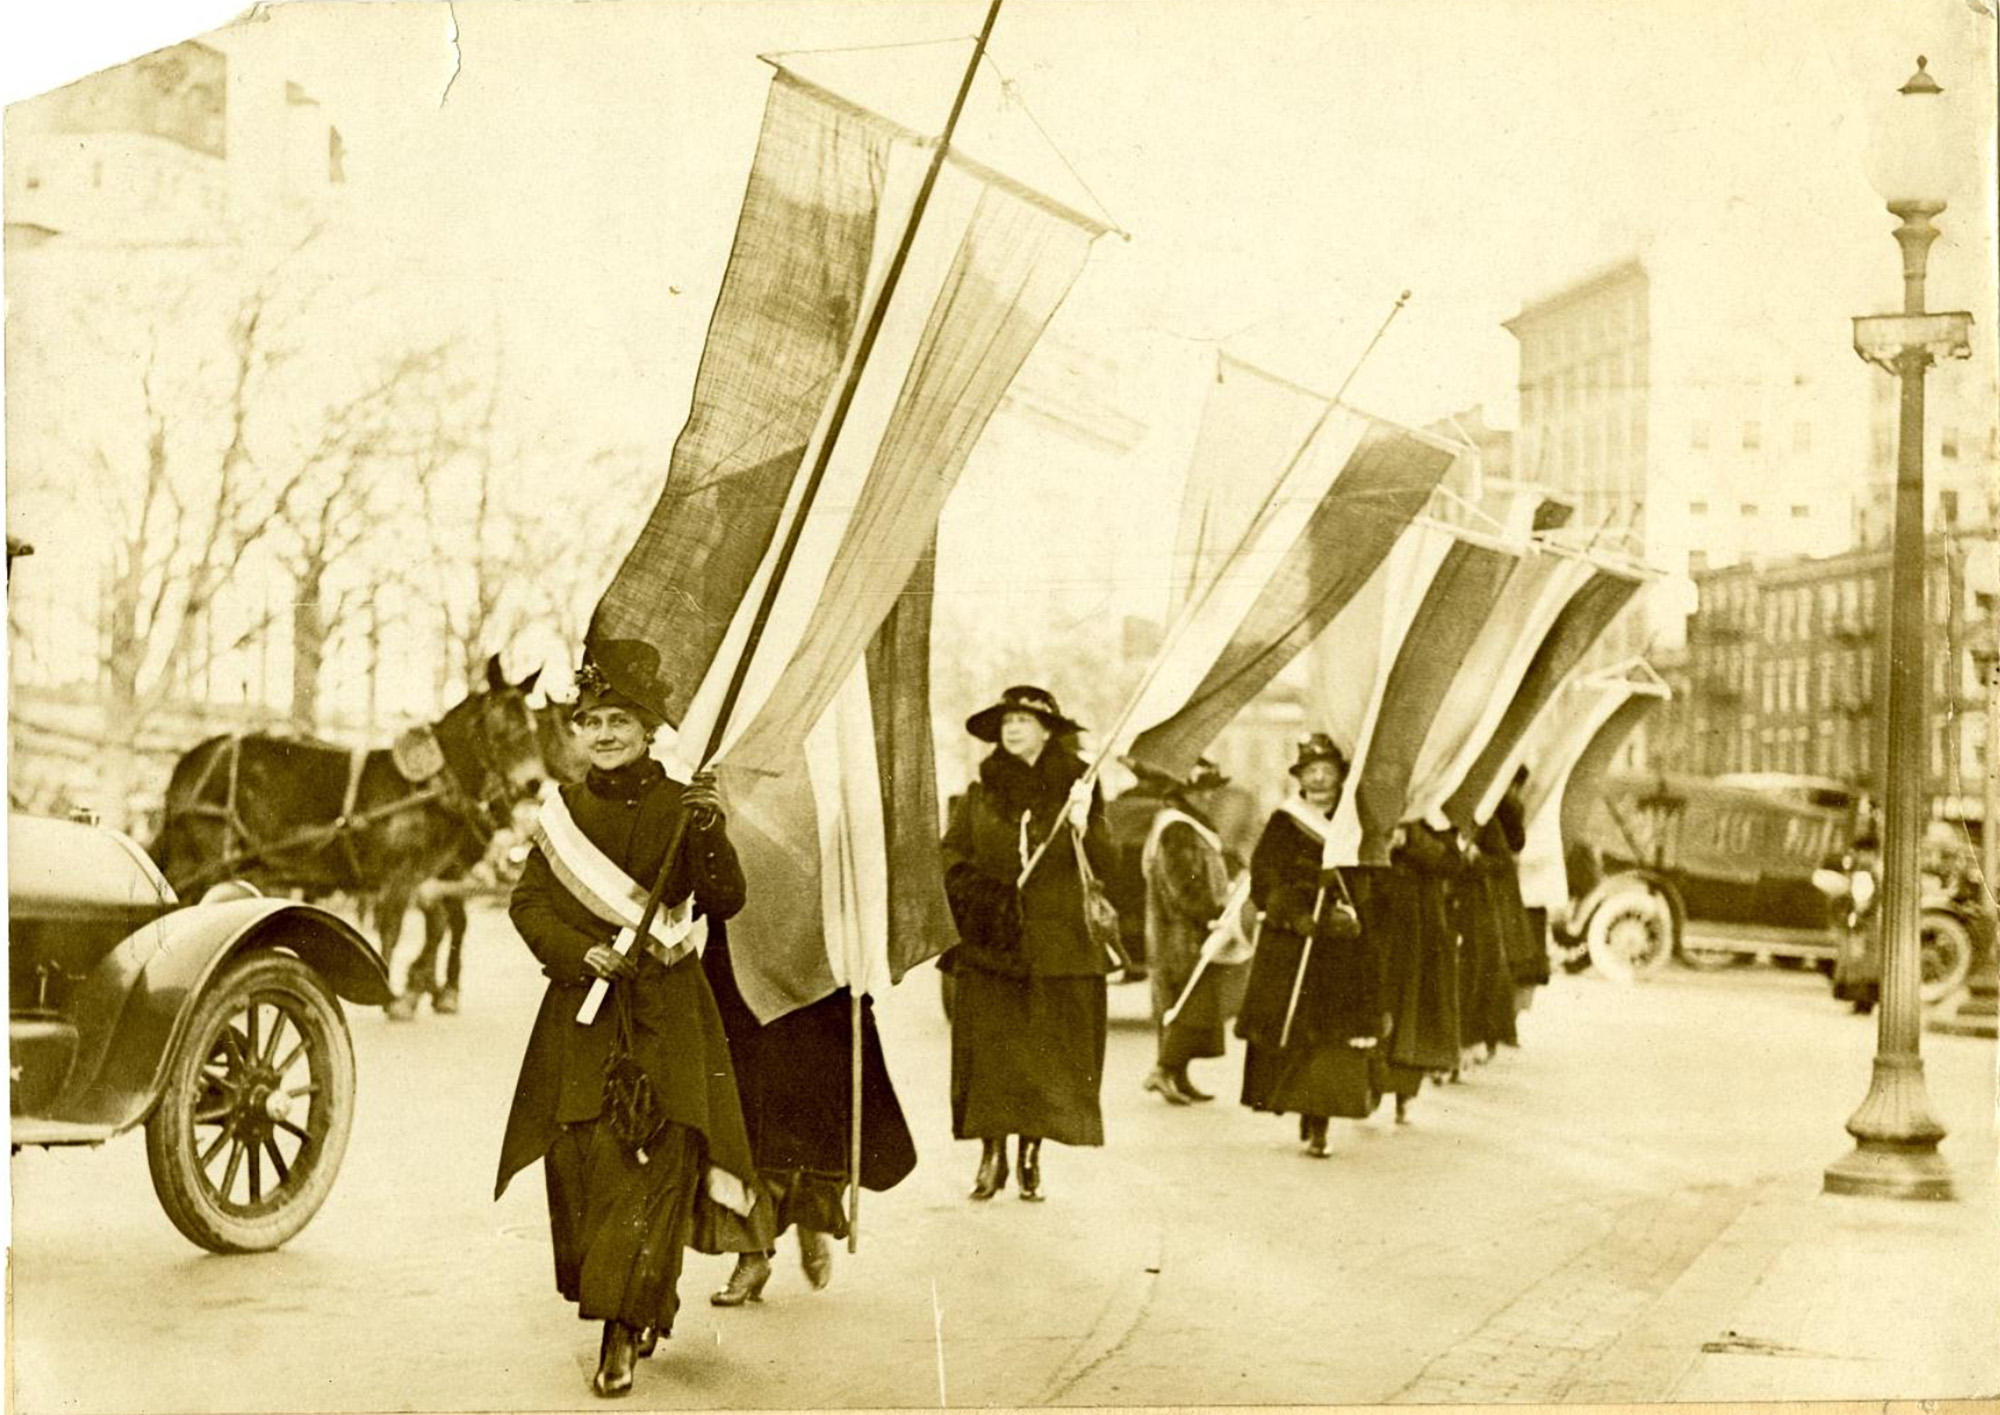 Suffragists protesting